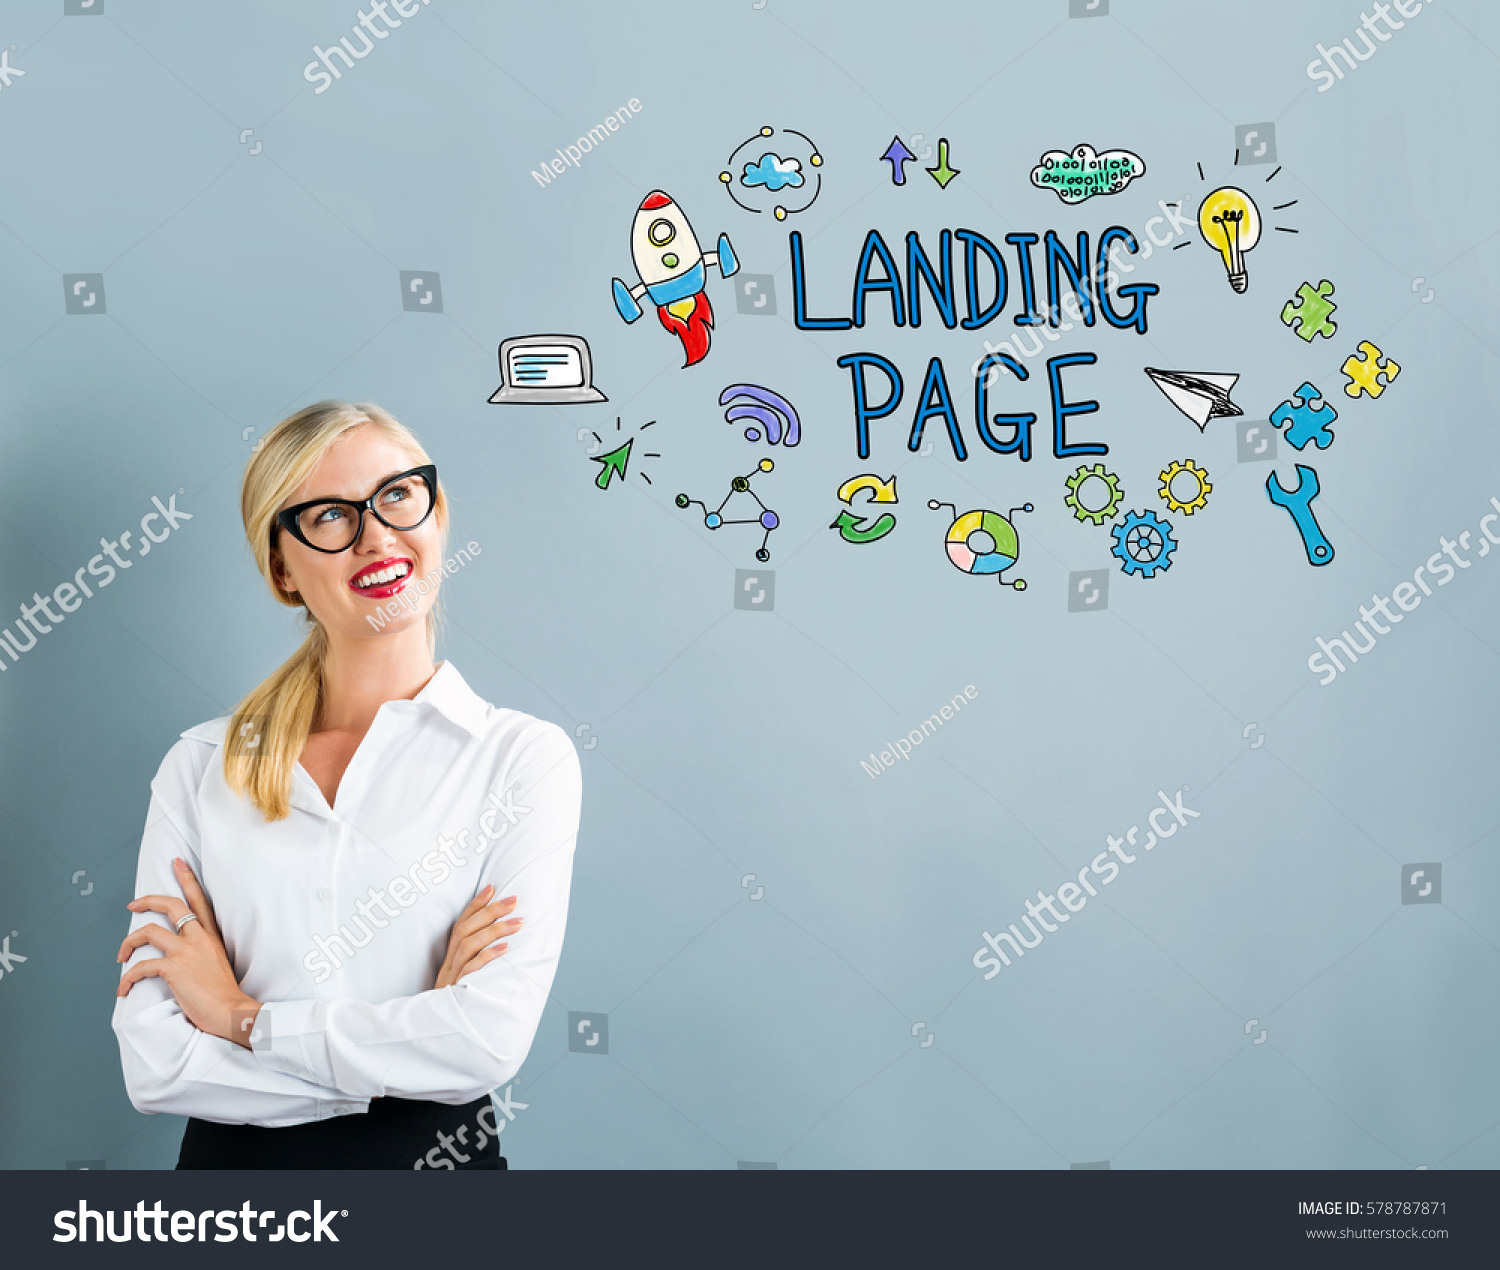 Landing Page text with business woman on a gray background #578787871